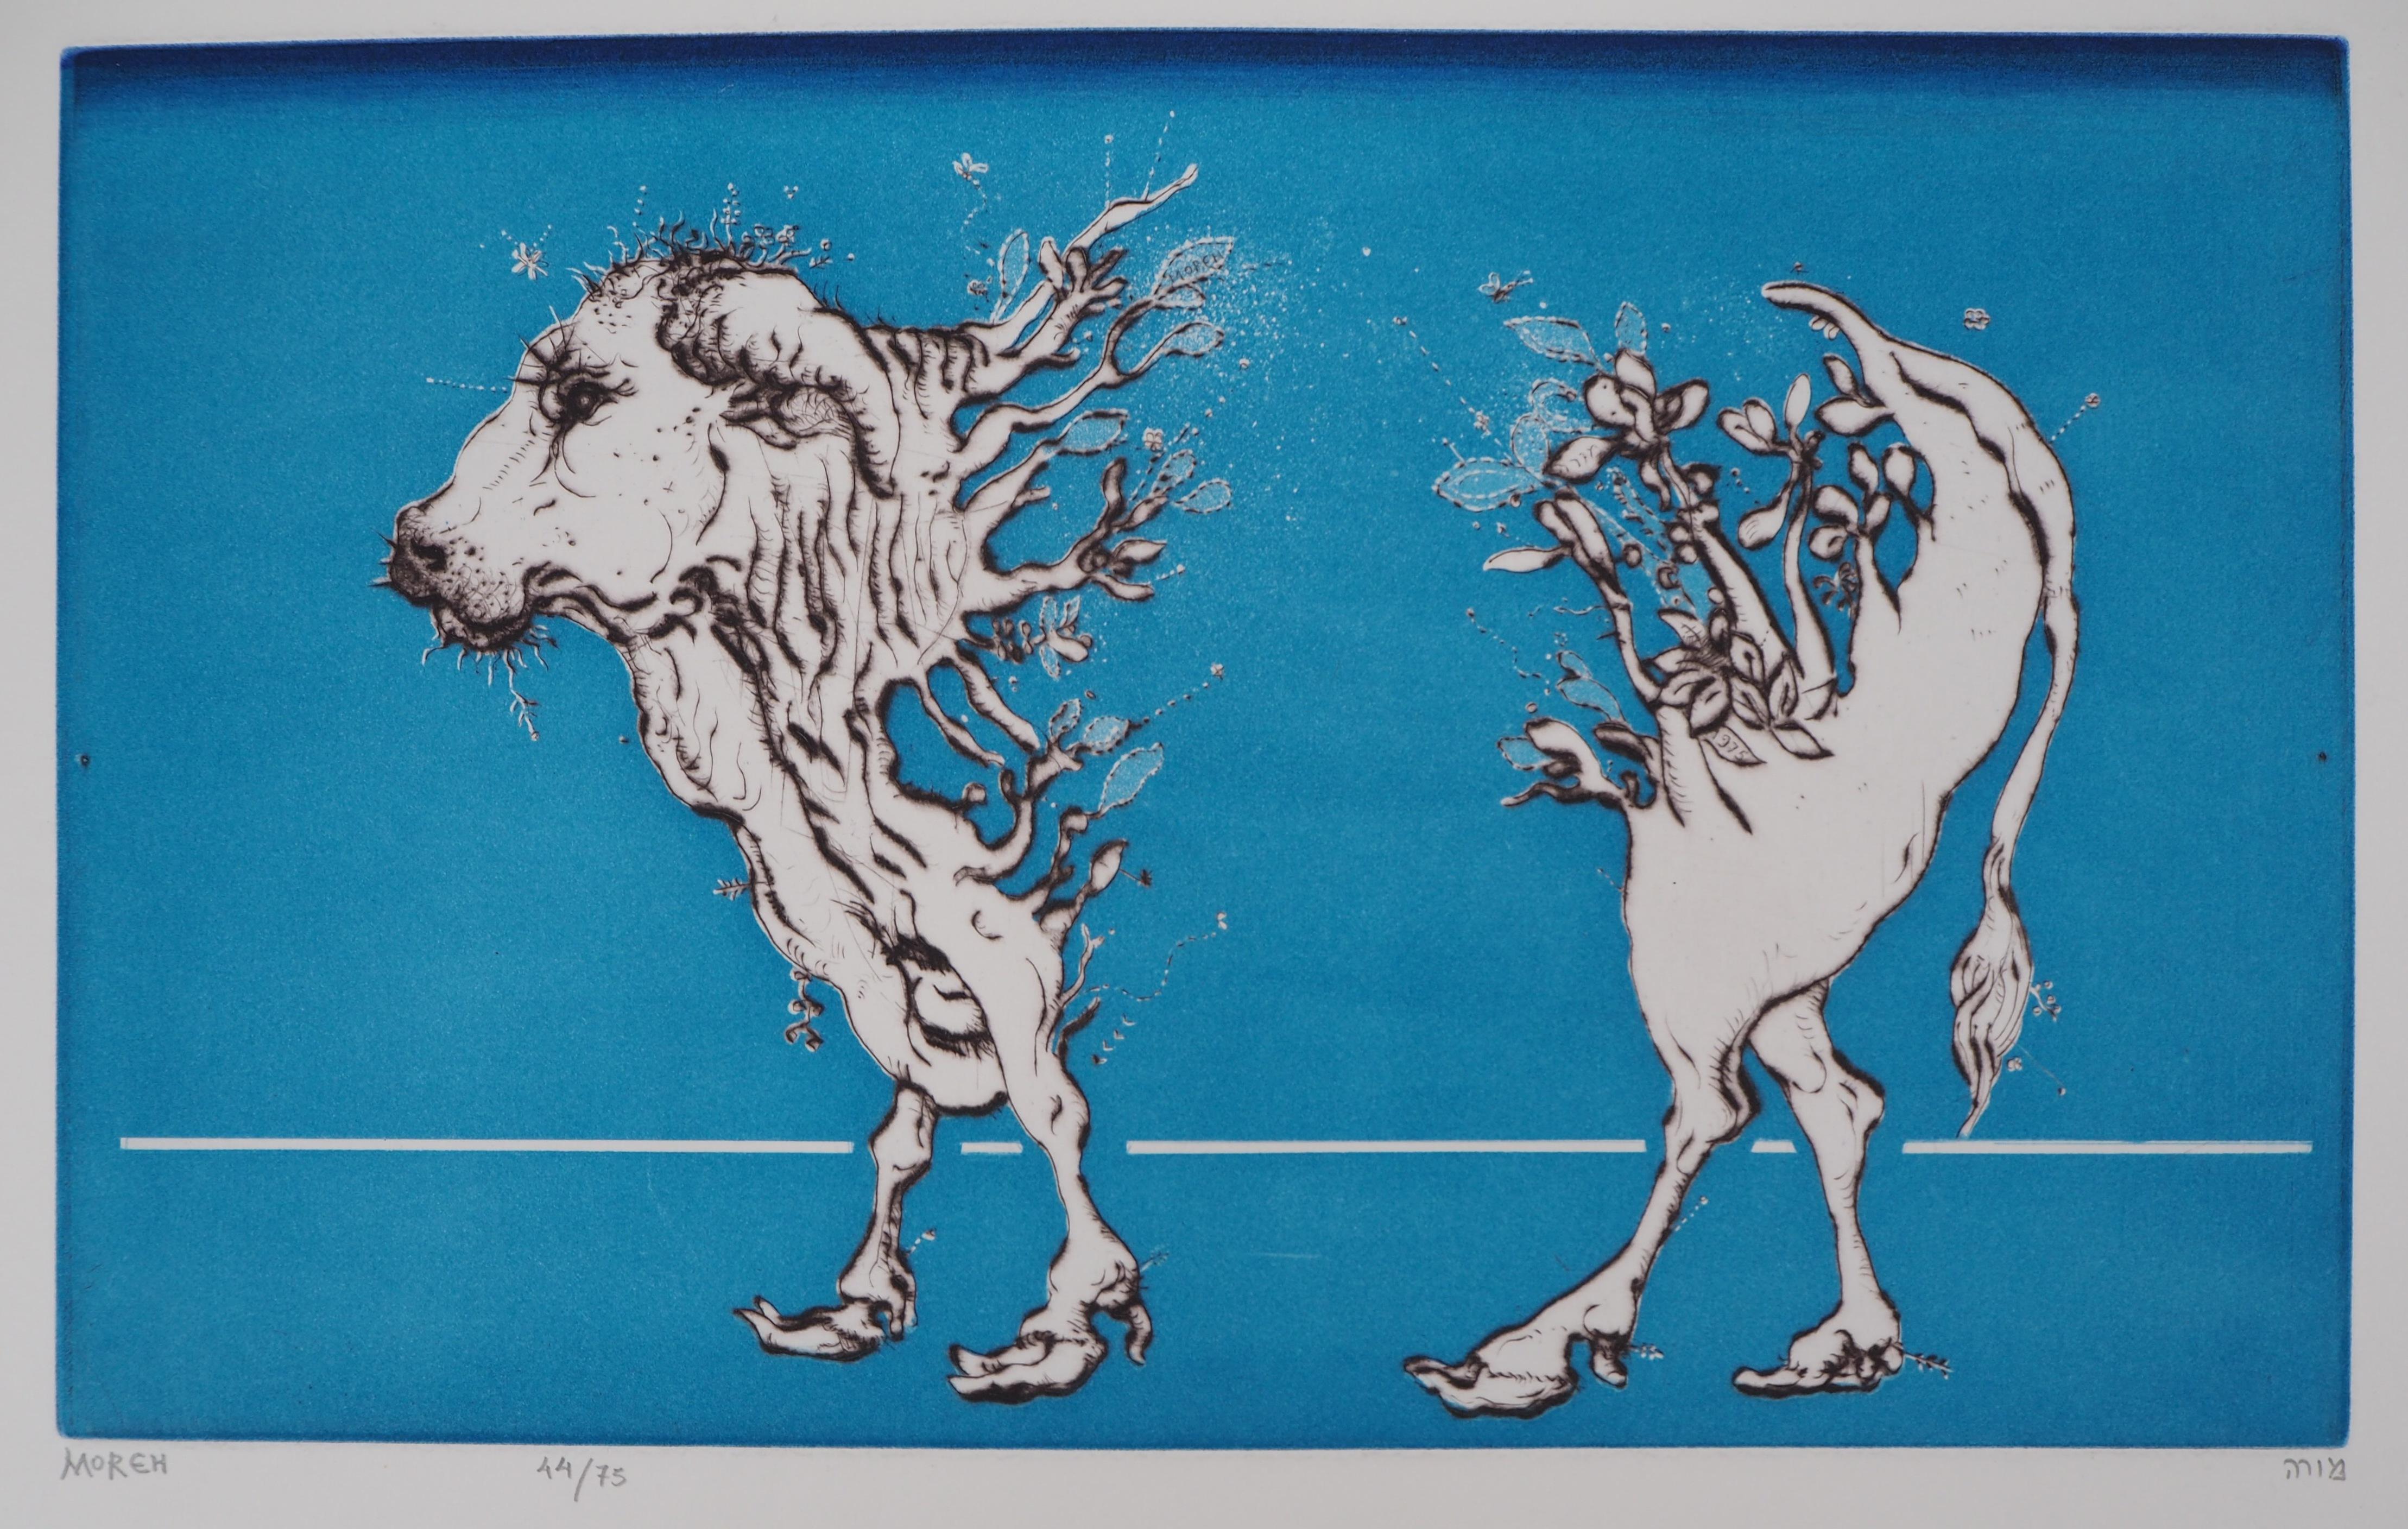 The Vegetal Cow - Etching, Ltd 75 copies - Print by Mordecai Moreh